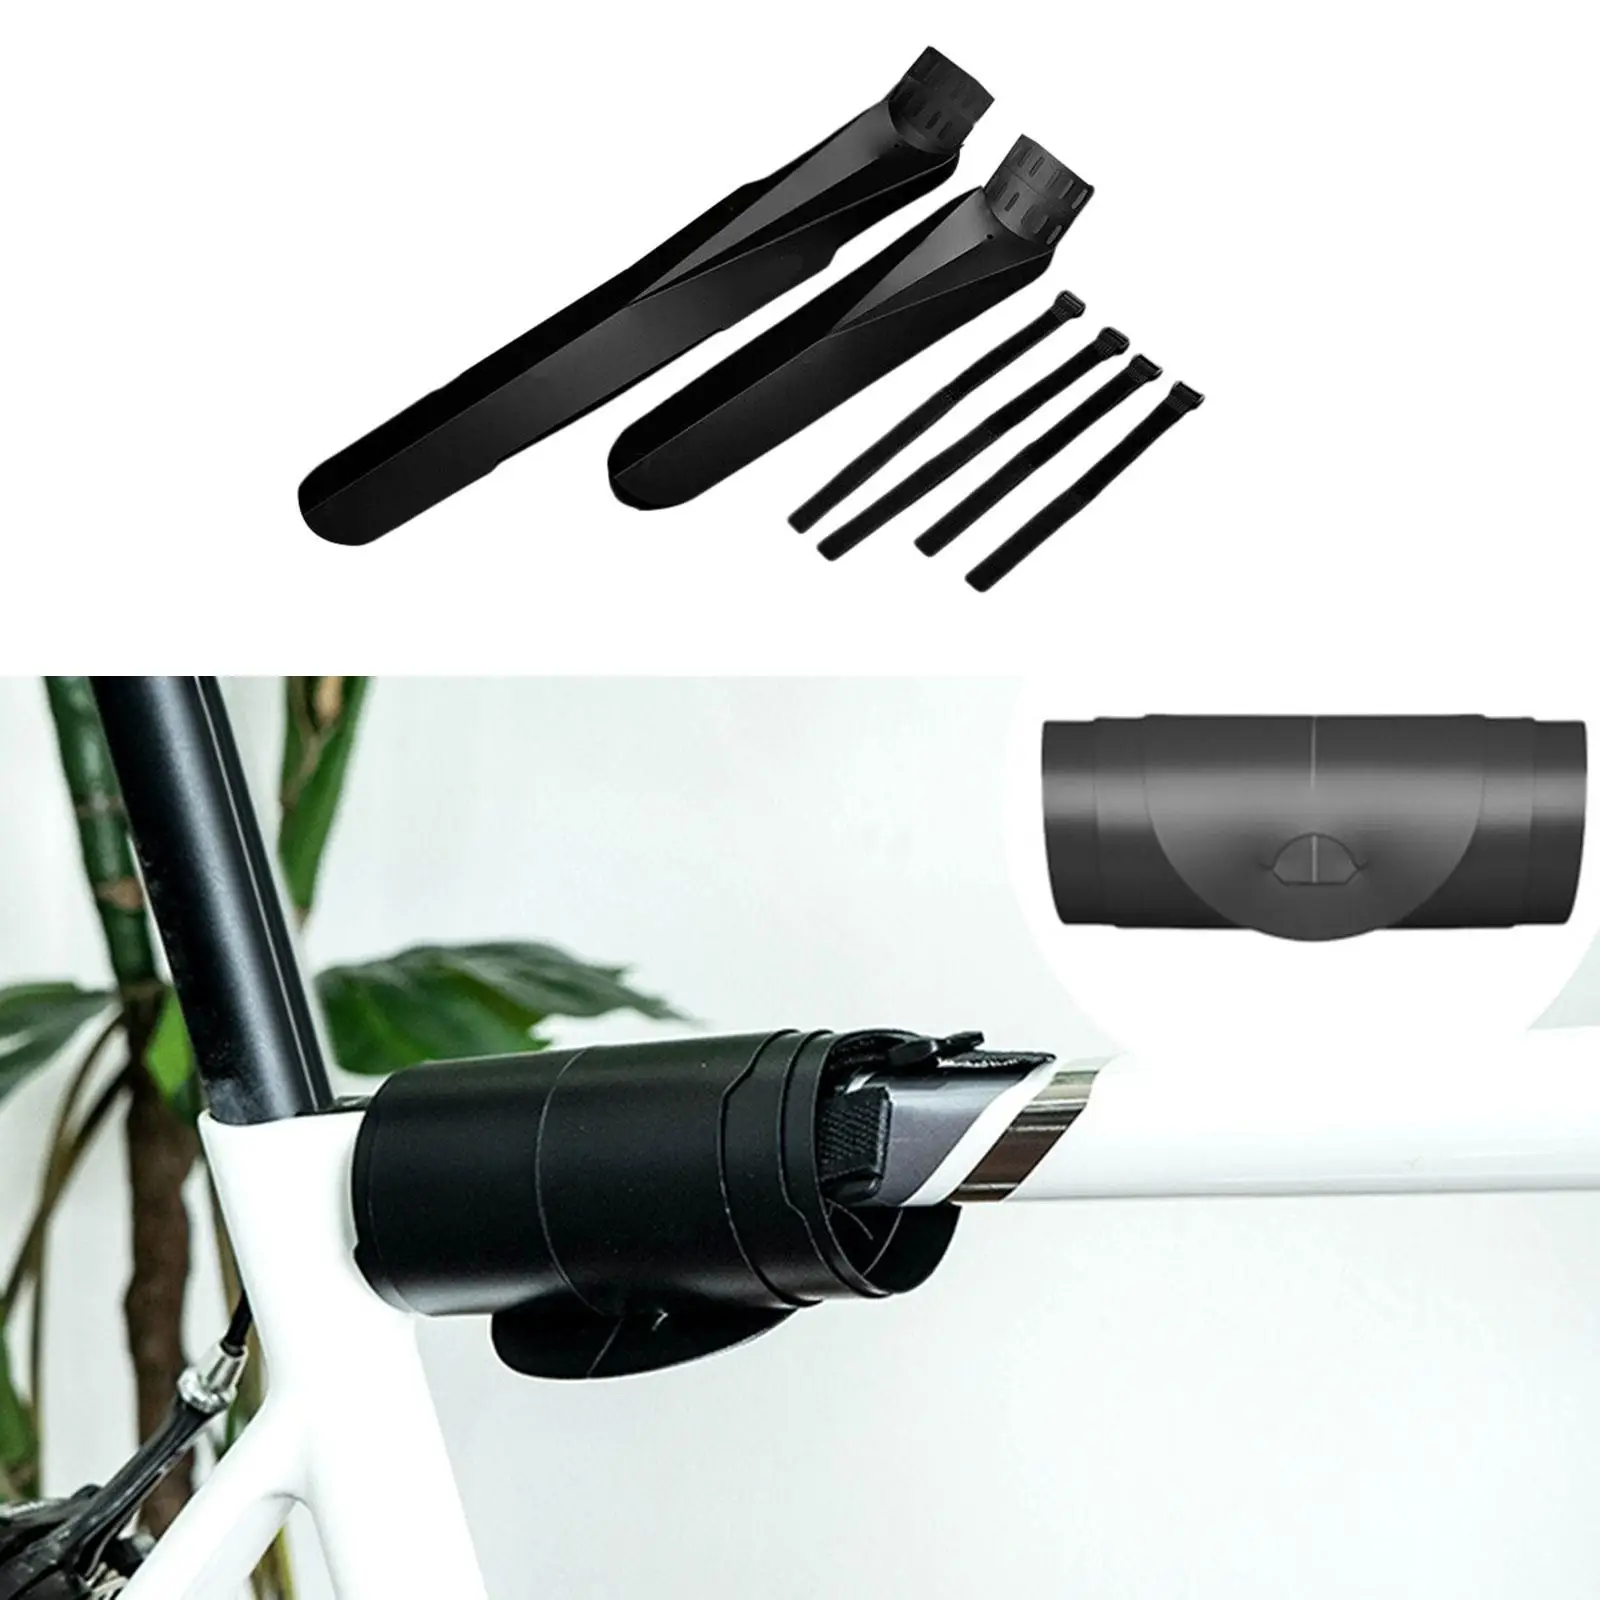 Bike Mudguard Collapsible Fittings Durable Parts Front Rear Set for Road Bike Cycling